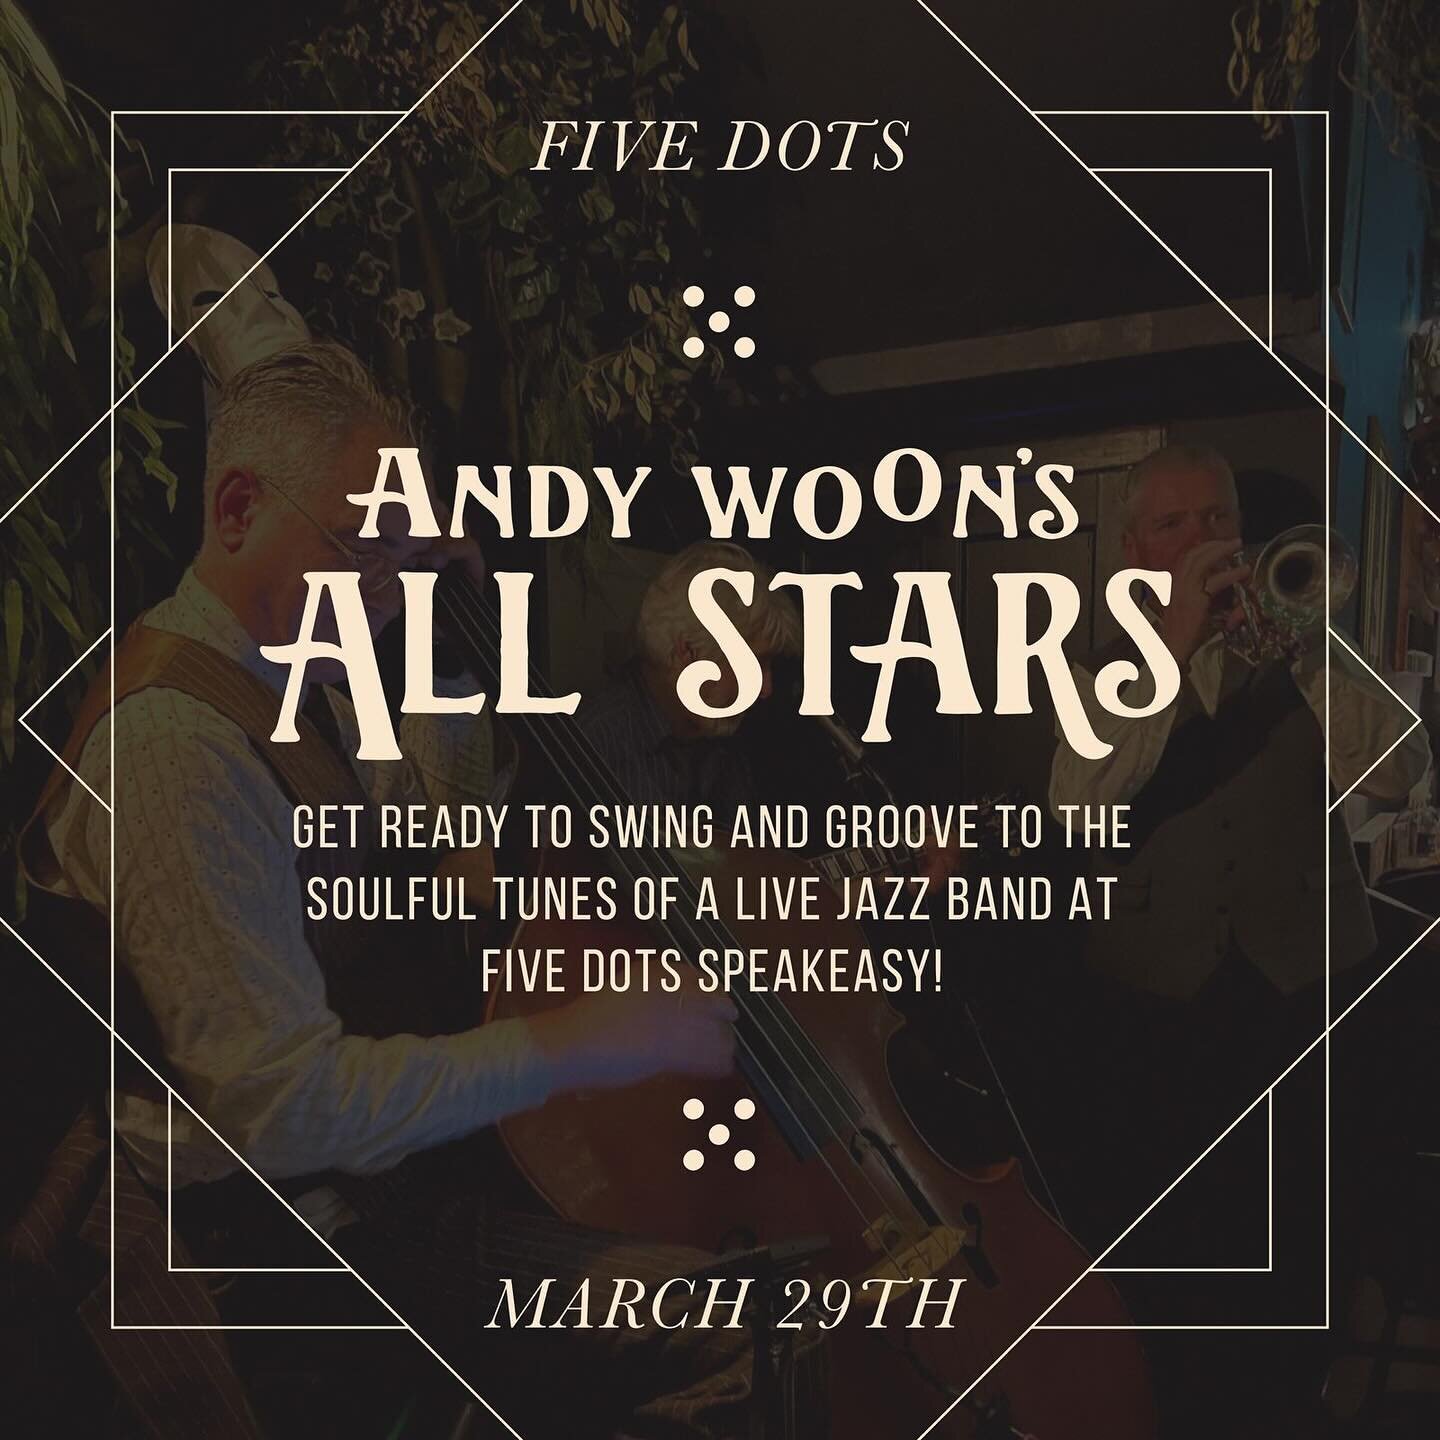 Swing and groove to the rhythm of Andy Woon&rsquo;s All Stars this Friday March 29th at Five Dots! Don't miss out! Book ahead to secure your spot or swing by as a walk-in. See ya&rsquo;ll Friday! 🎺🎻

🎟️ Free Entry
🗓️ 29th March, 8pm
📍 Chapel Rd,